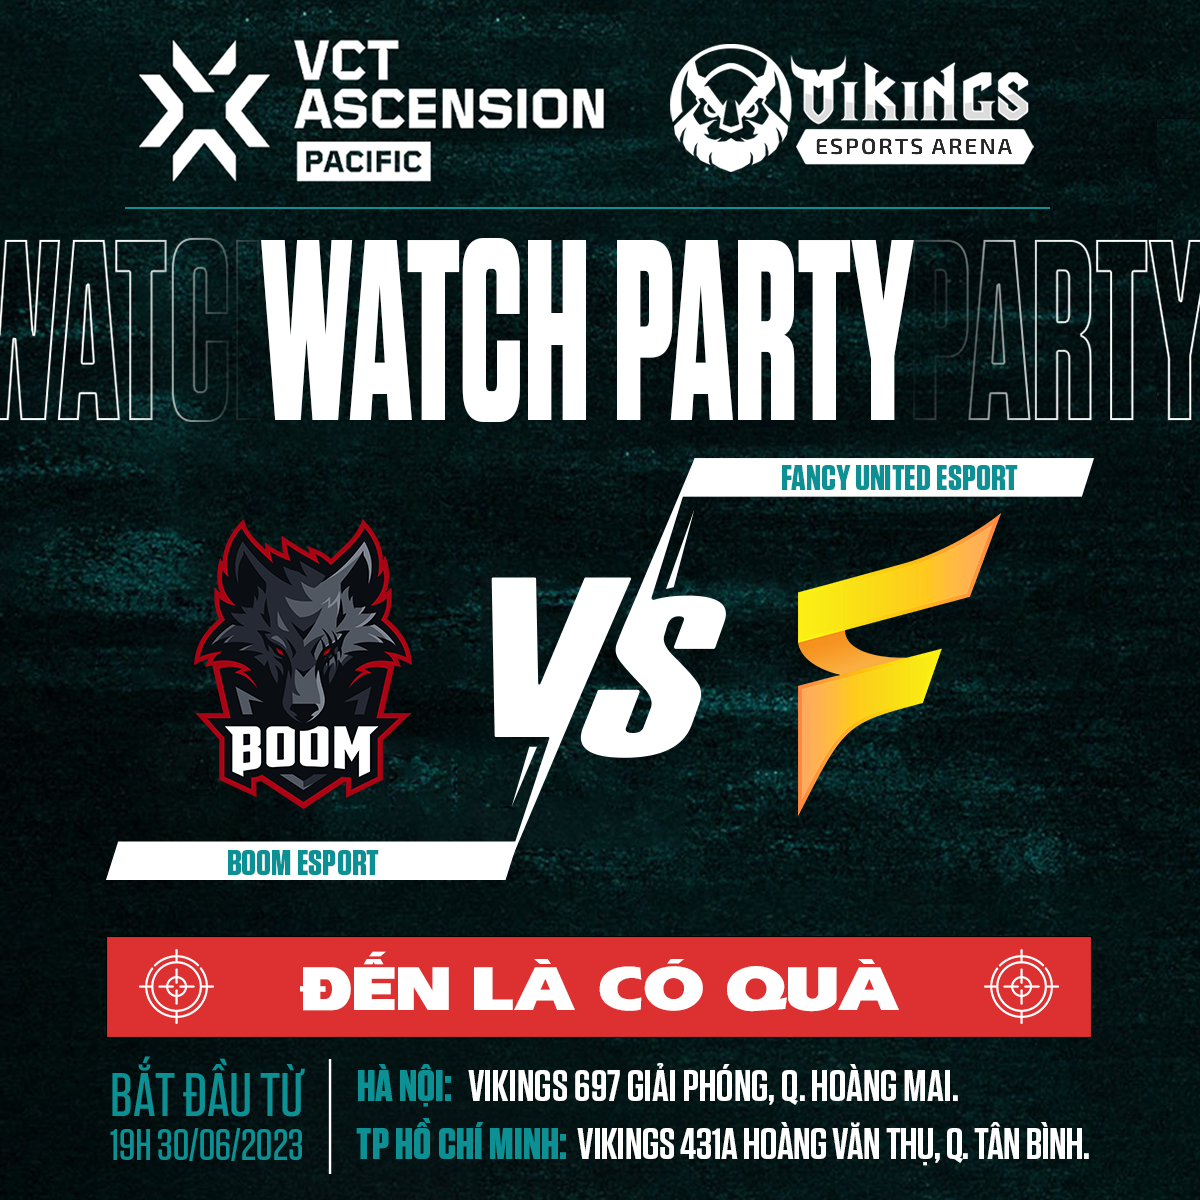 WATCH PARTY VCT ASCENSION PACIFIC: FANCY UNITED ESPORTS vs BOOM